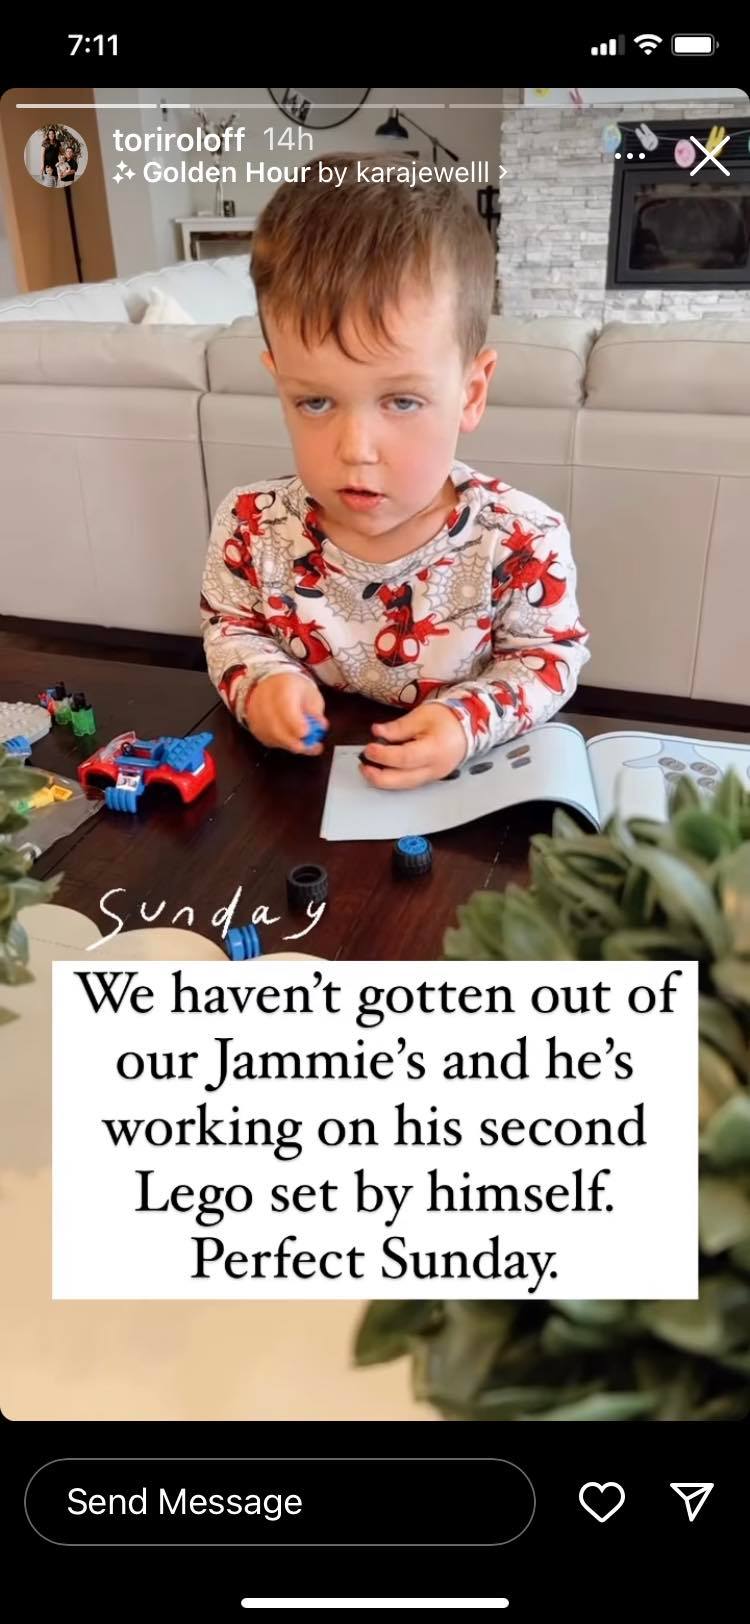 Jackson Roloff Won't Get Out Of His Jammies [Credit: Tori Roloff/Instagram Stories]